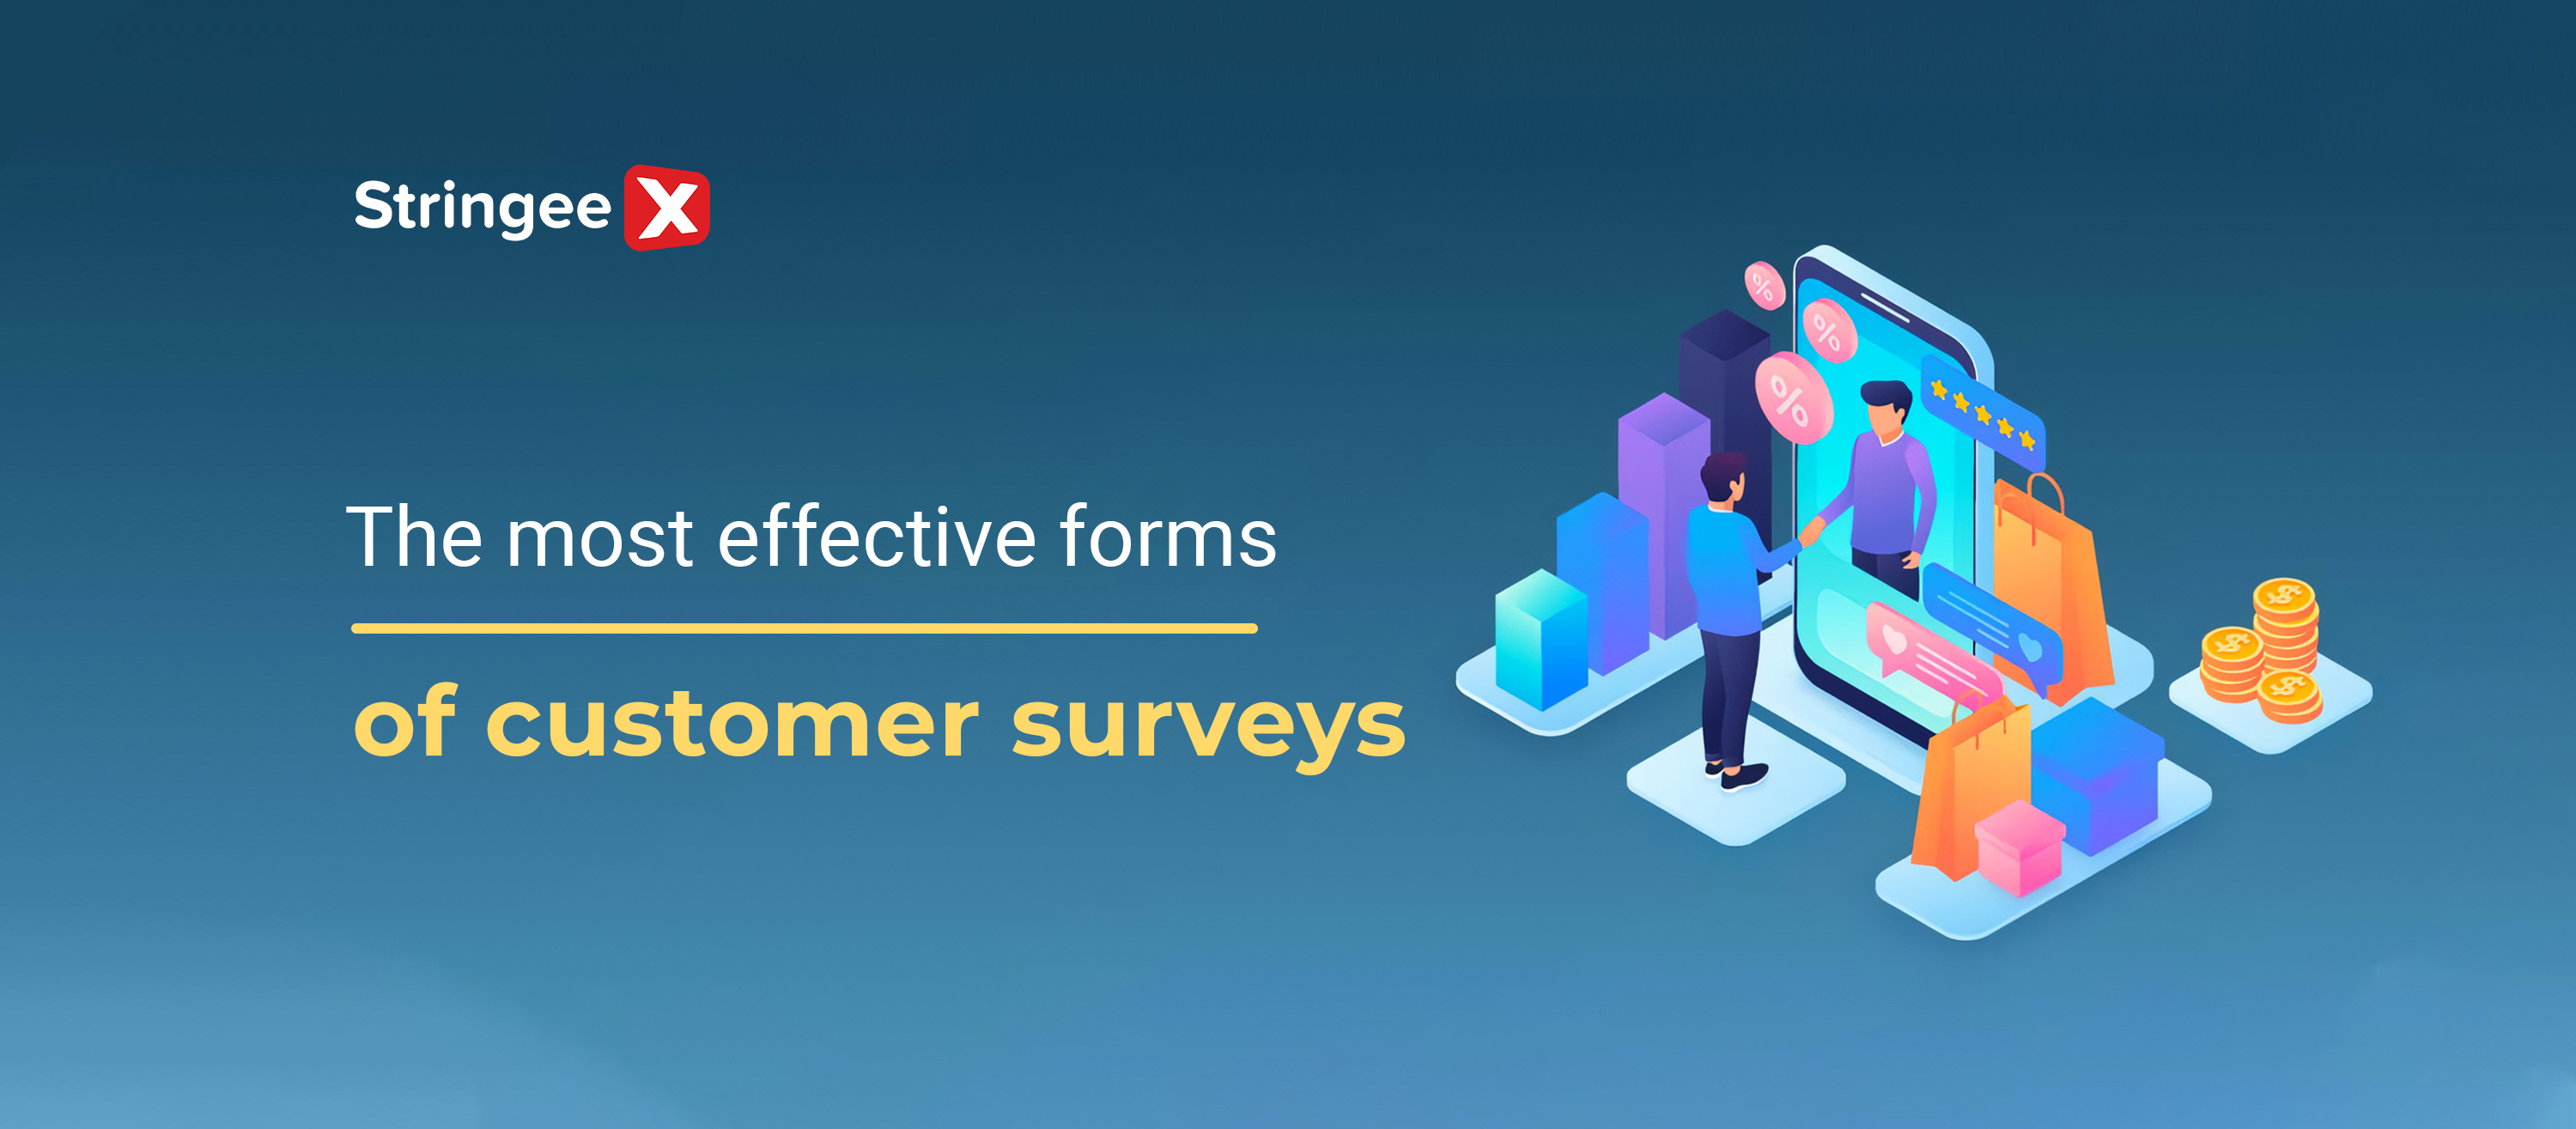 The most effective forms of customer surveys today